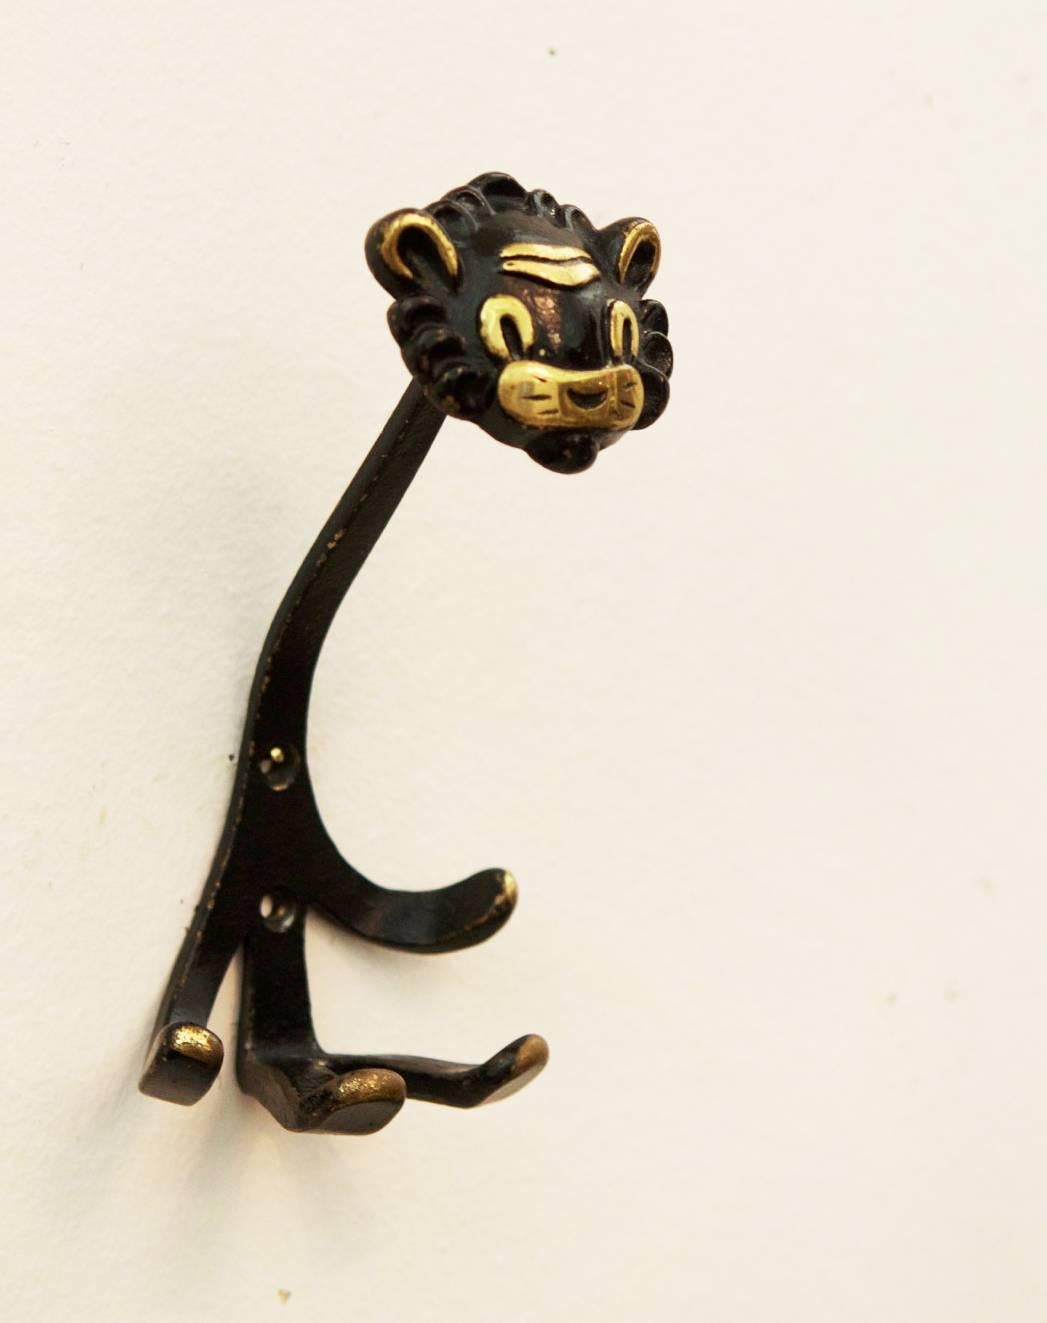 Brass hook "lion" by Walter Bosse for Hertha Baller, Vienna from the 1950s.
Used but in very good vintage condition.
Two pieces available.